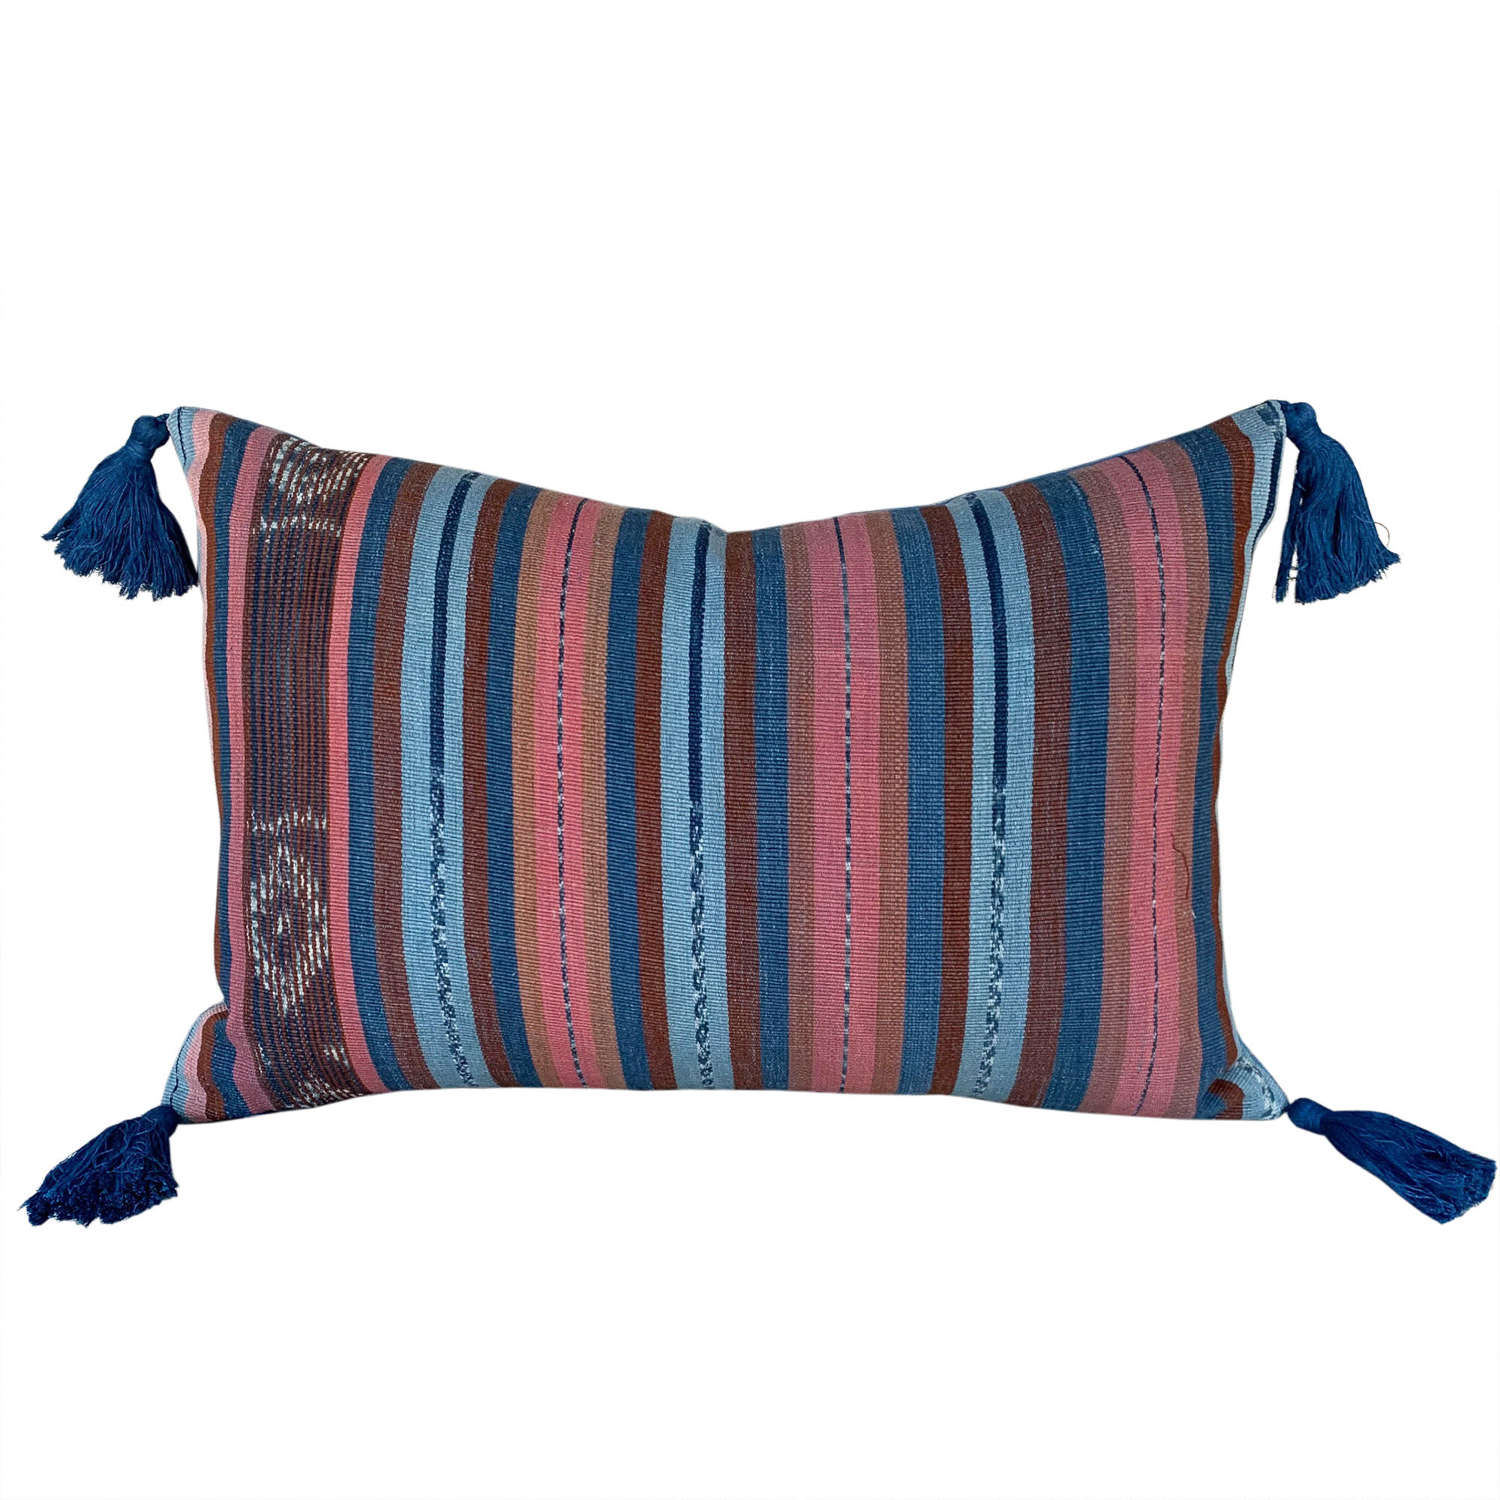 Flores Sikka cushion with blue tassels